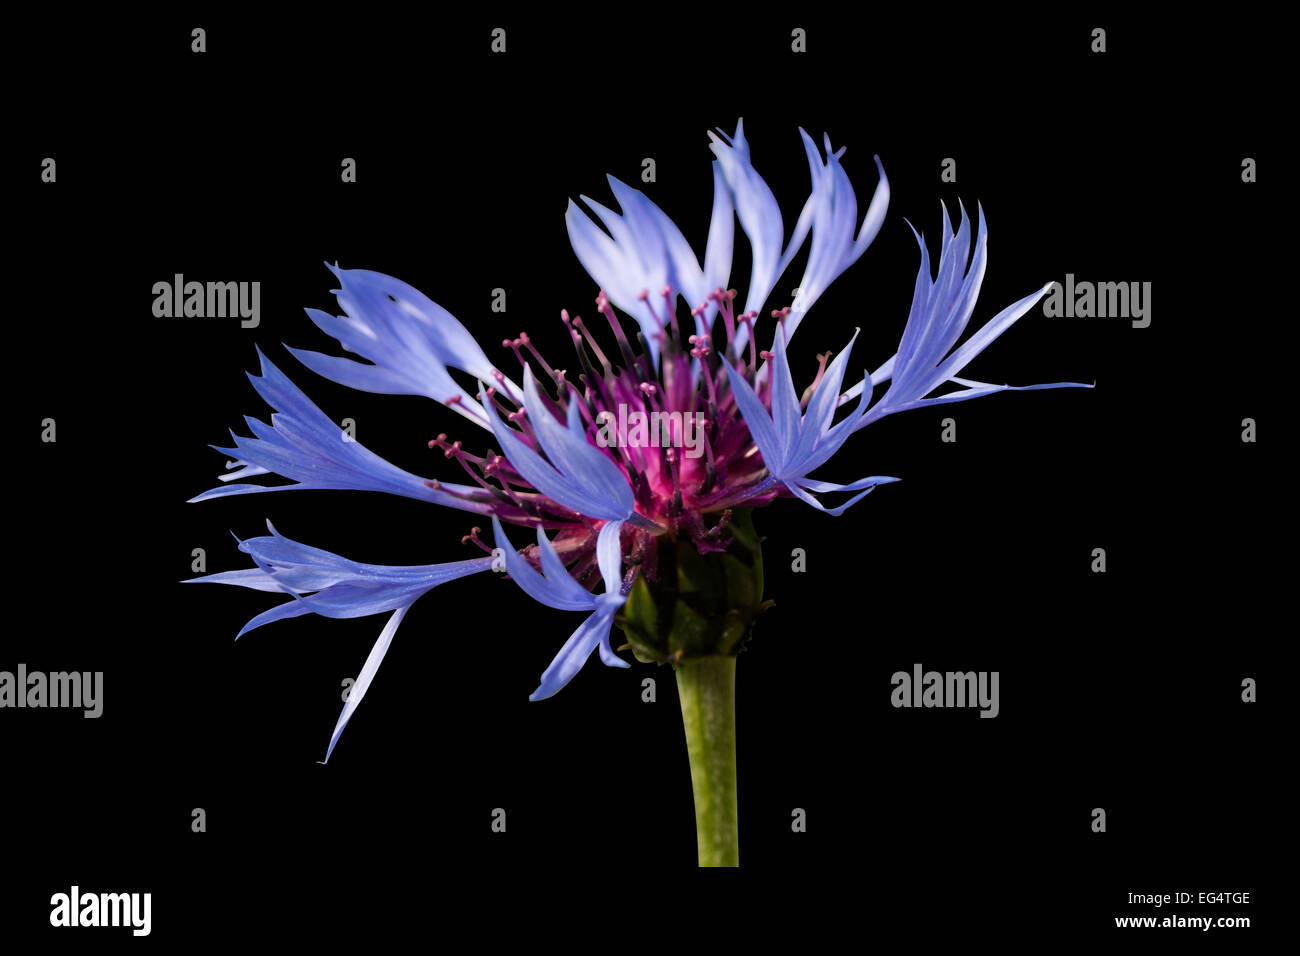 Squarrose Knapweed with Clipping path Stock Photo